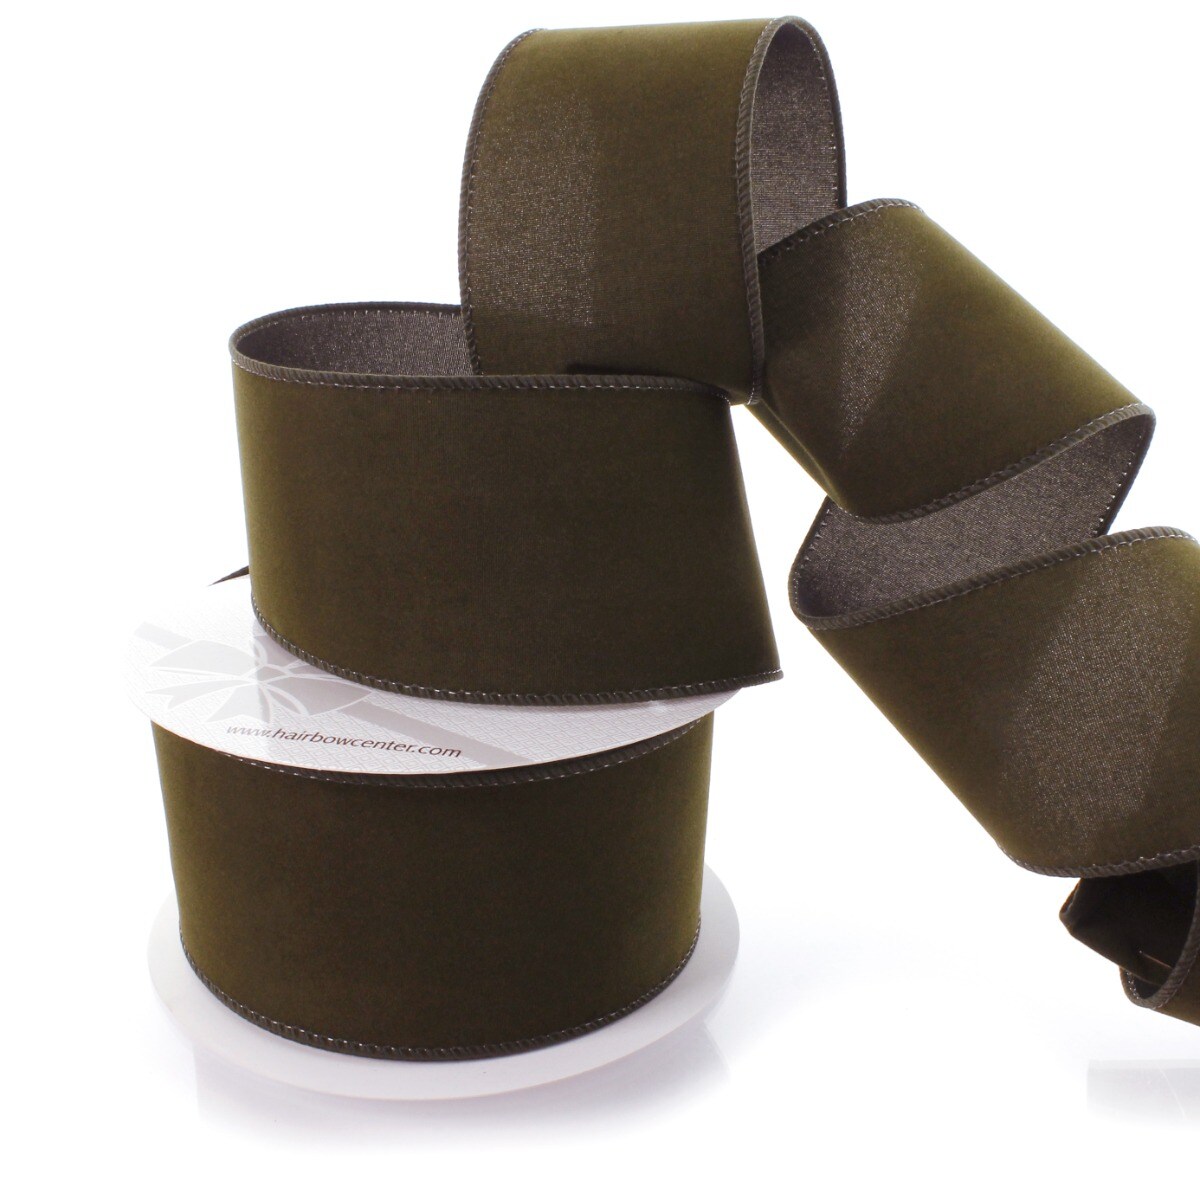 Ribbon Traditions 2.5 Wired Suede Velvet Ribbon Old Gold - 25